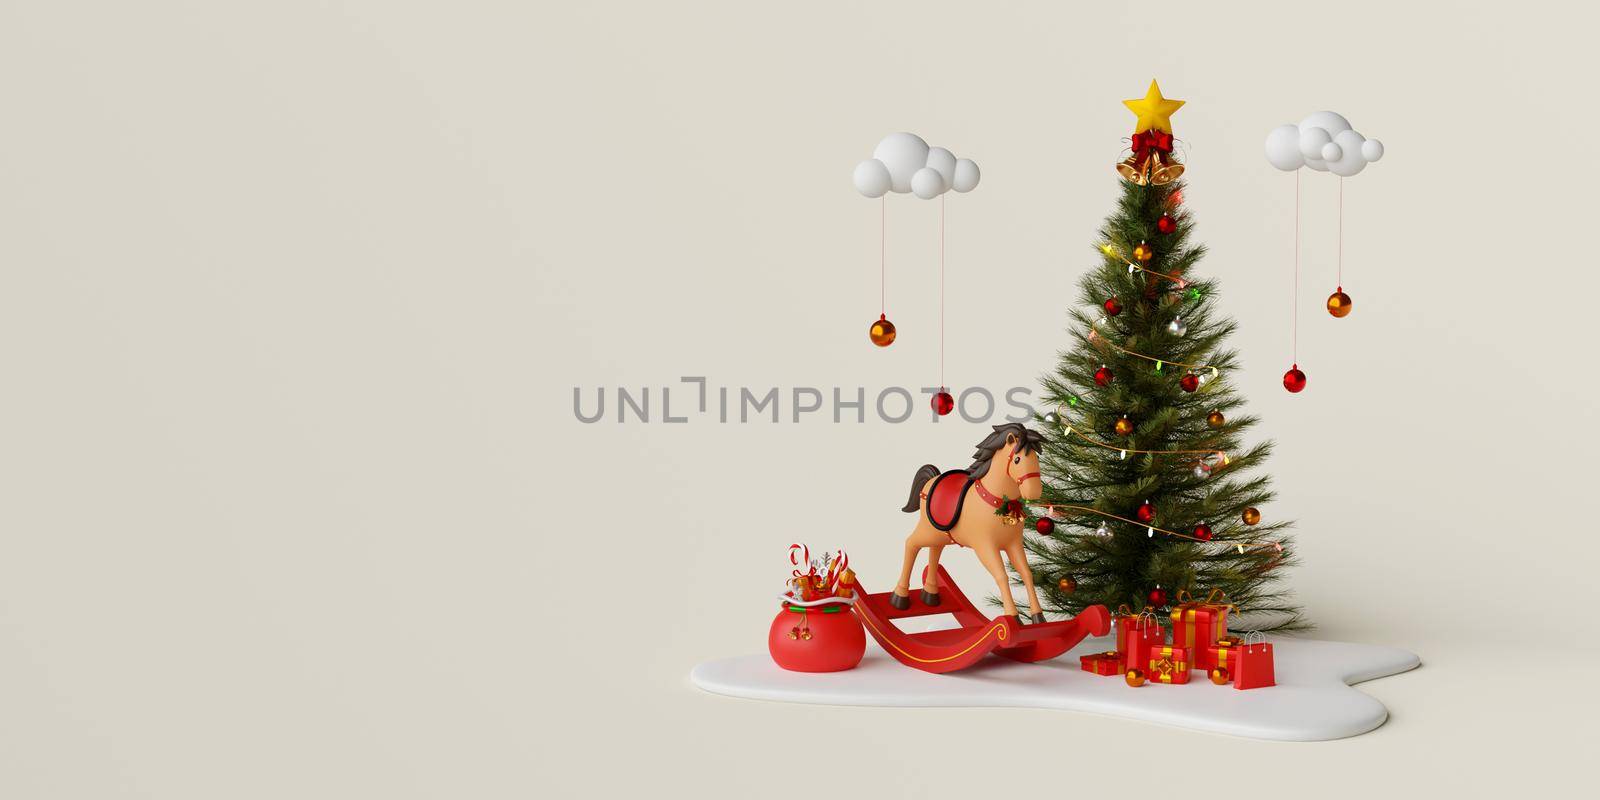 Christmas web banner of rocking horse, Christmas tree and gift box, 3d illustration by nutzchotwarut